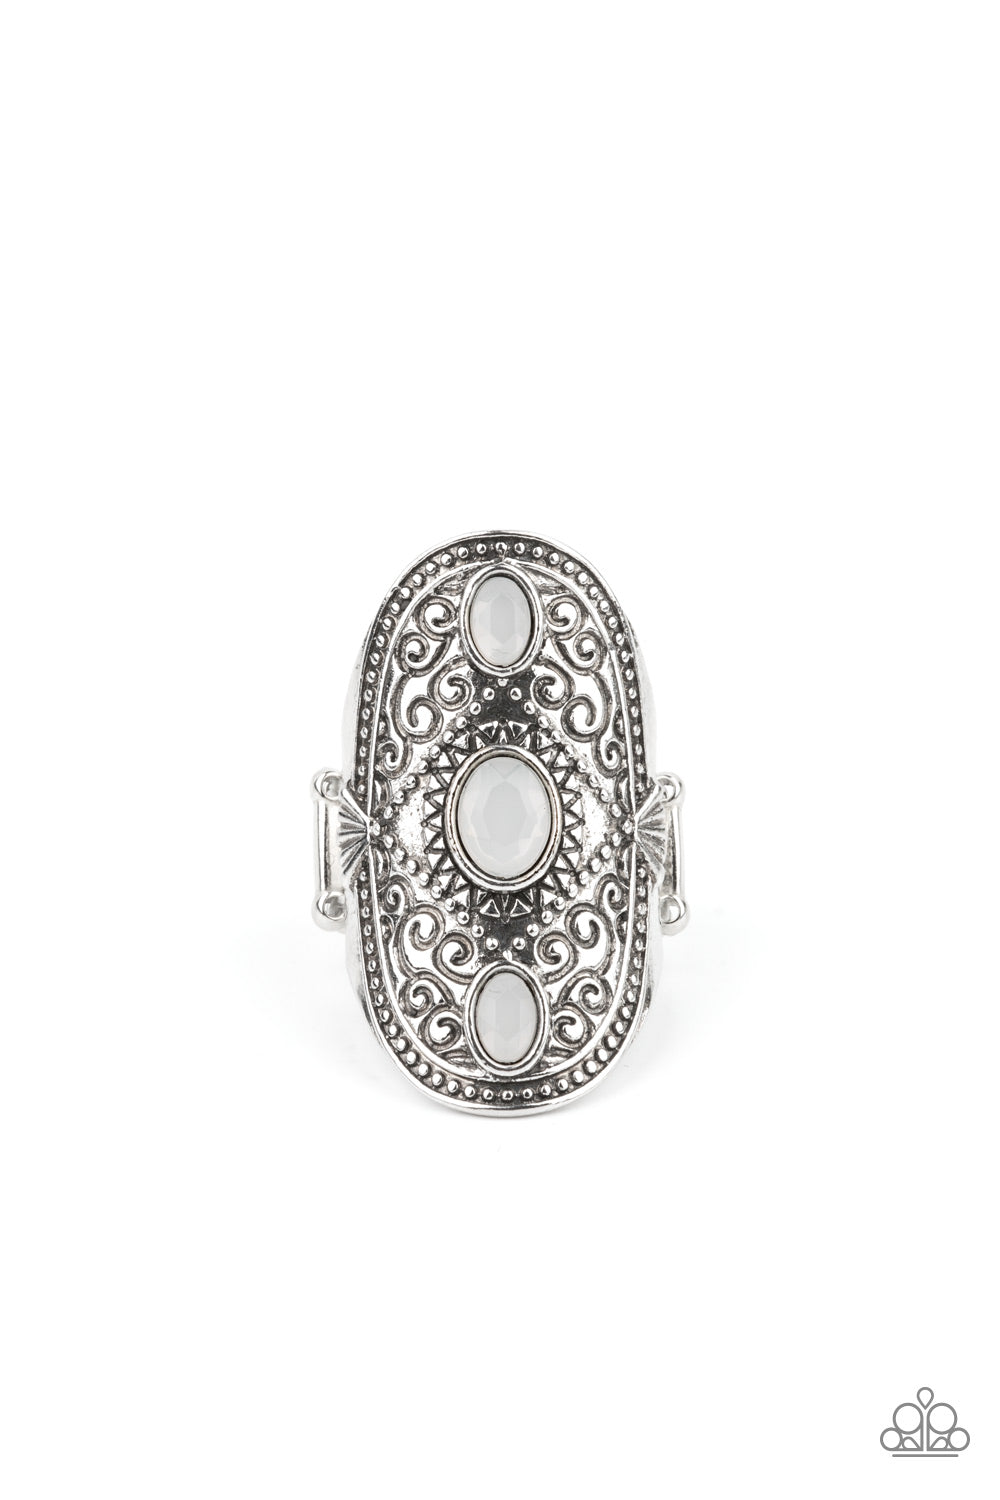 Promenade Paradise White Ring - Paparazzi Accessories  A trio of opaque white oval beads encased in silver frames graces the top of an elaborately decorated silver band. Dotted texture and floral designs create a statement-making finish atop the finger. Features a stretchy band for a flexible fit.  All Paparazzi Accessories are lead free and nickel free!  Sold as one individual ring.